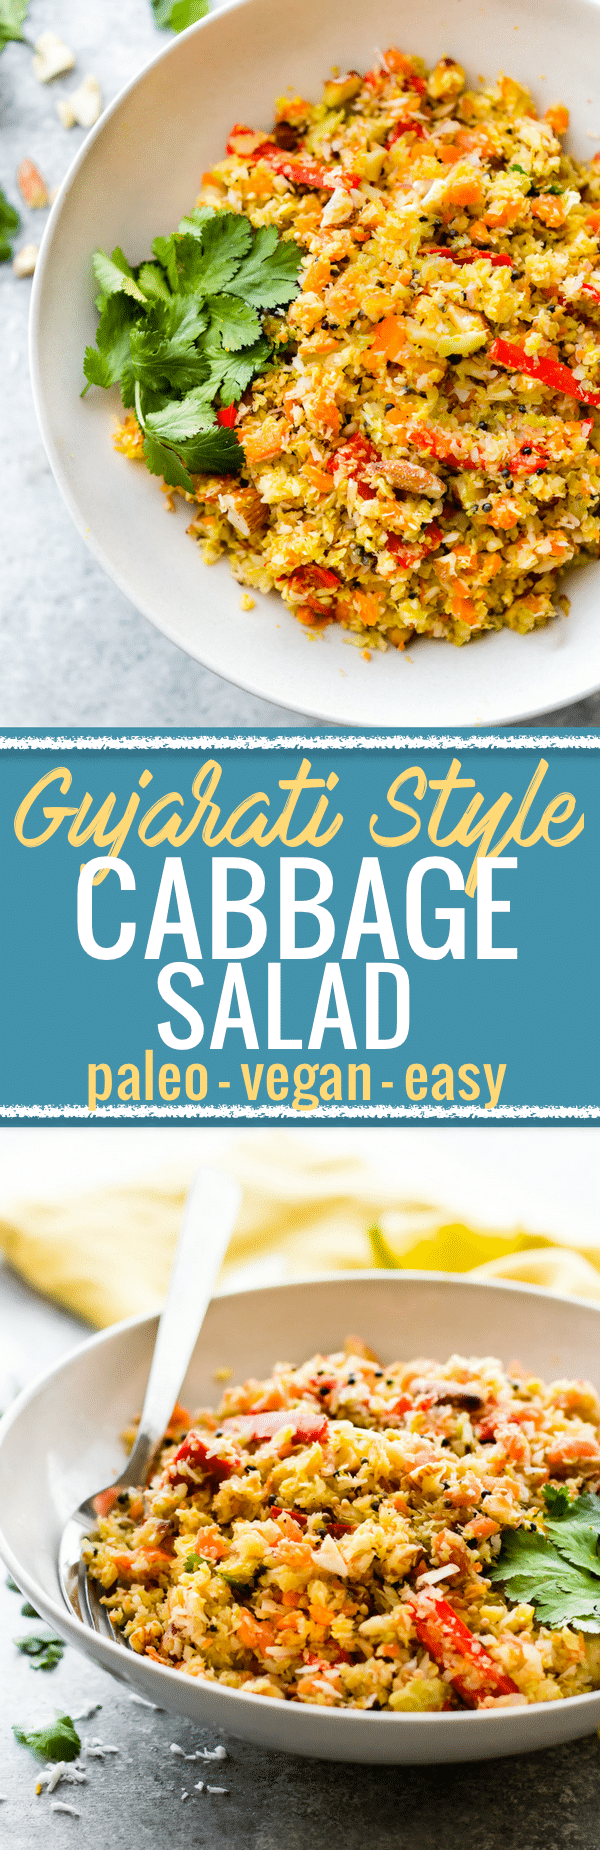 Gujarati Style Coconut Almond Warm Cabbage Salad is a healthy plant based dinner side or main! A spicy, sweet, crunchy, flavorful Indian inspired cabbage salad to enjoy at any meal. Pot luck friendly and easy to make! Paleo, Vegan, and even a Whole 30 option www.cottercrunch.com